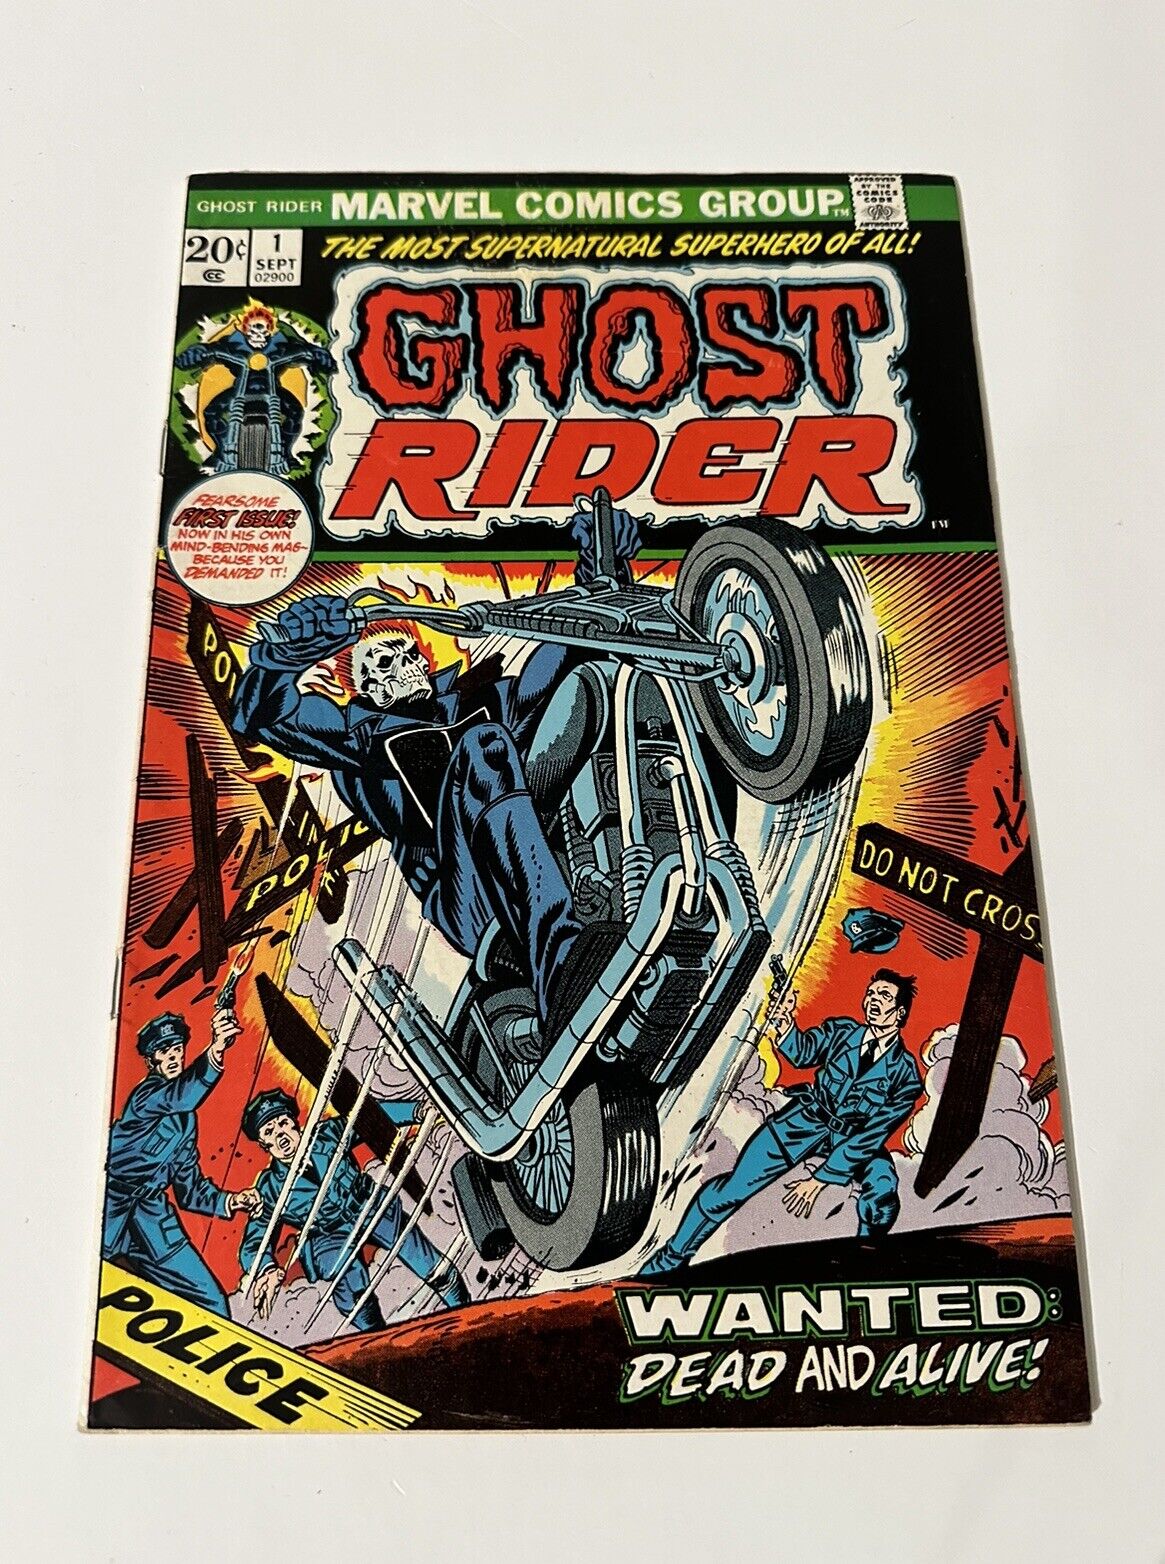 1973 GHOST RIDER ISSUE #1 COMIC WANTED DEAD & ALIVE  FEARSOME FIRST ISSUE 02900